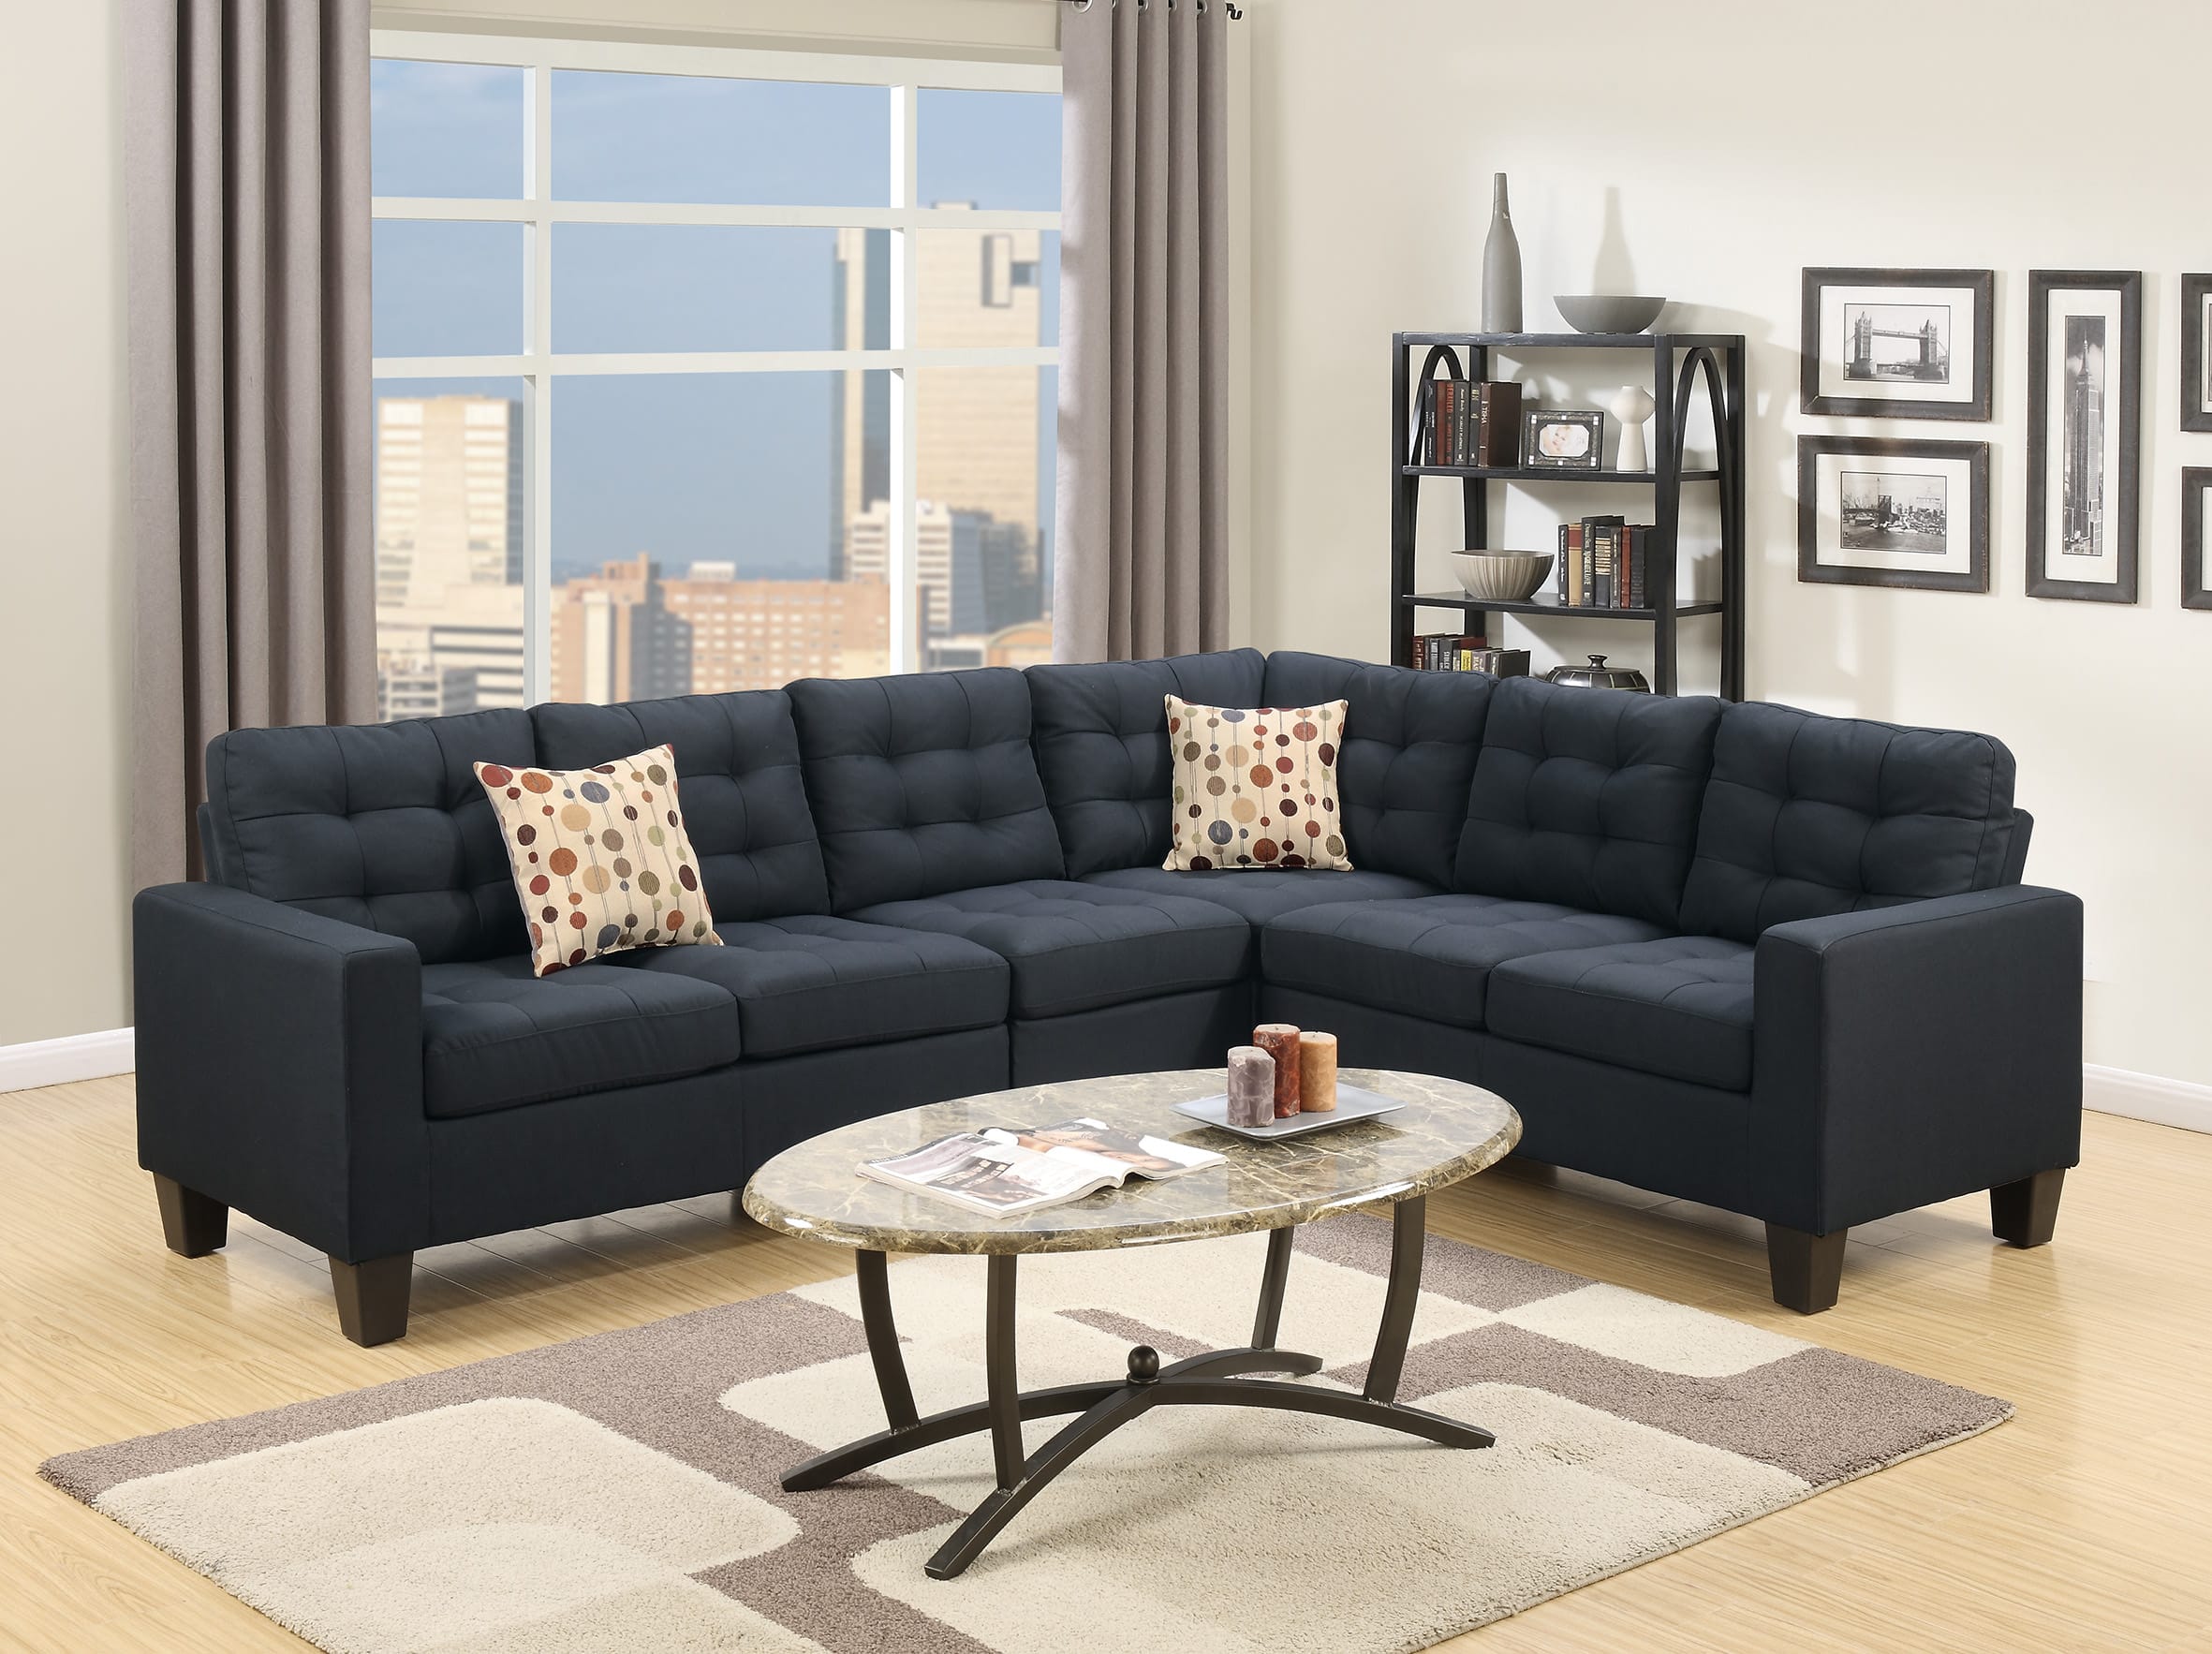 F6937 Black Sectional Sofa By Poundex